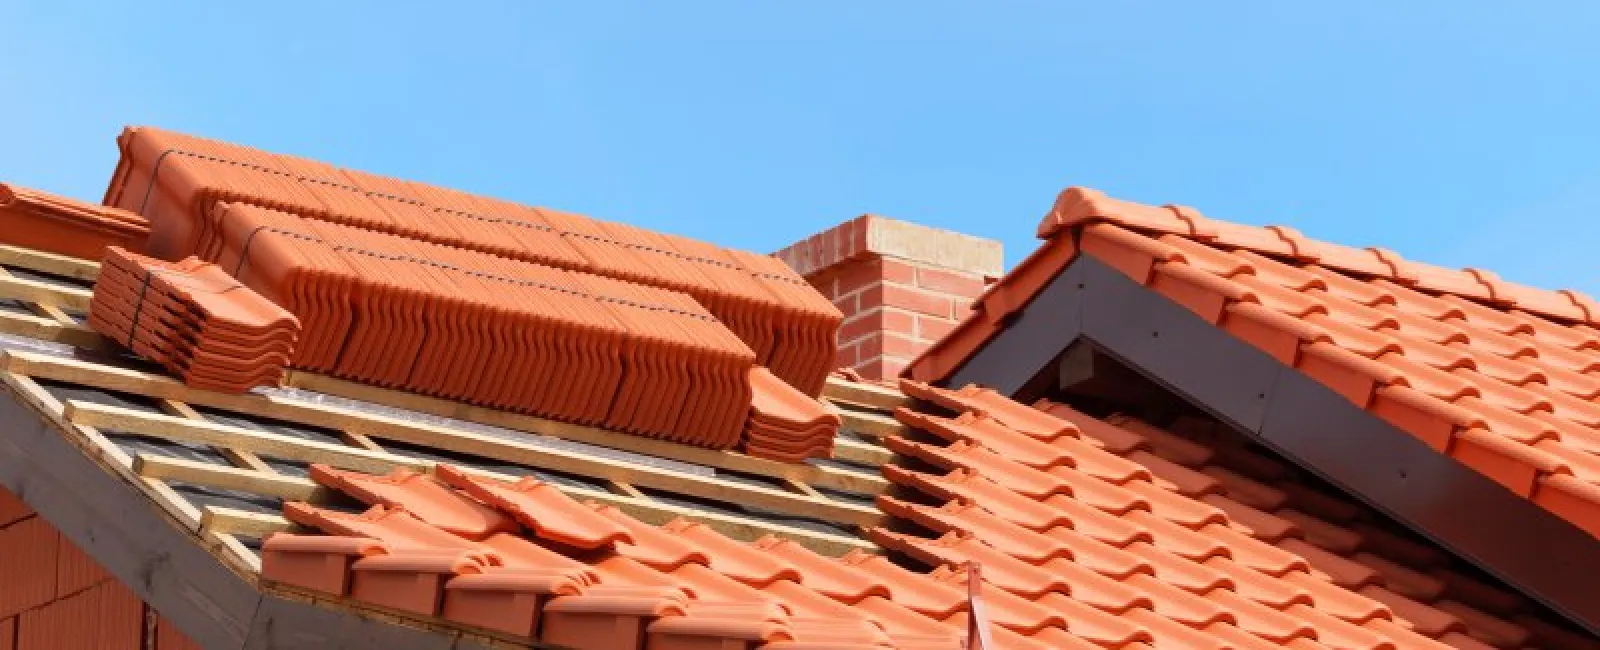 5 Roofing Problems You Can’t Ignore